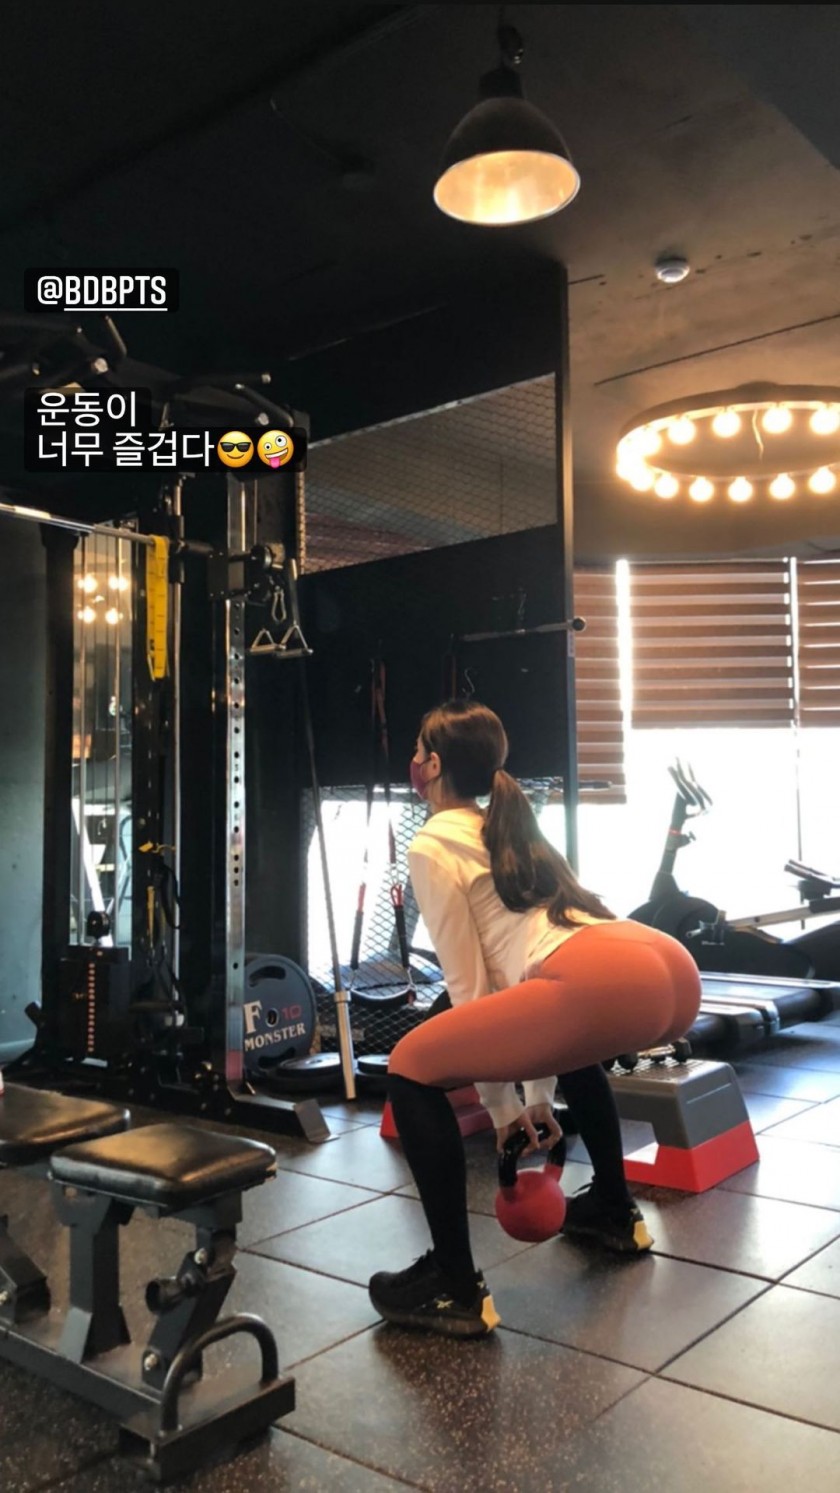 Pink leggings that enjoy exercising. Stretching posture. Chohyun's angry butt.